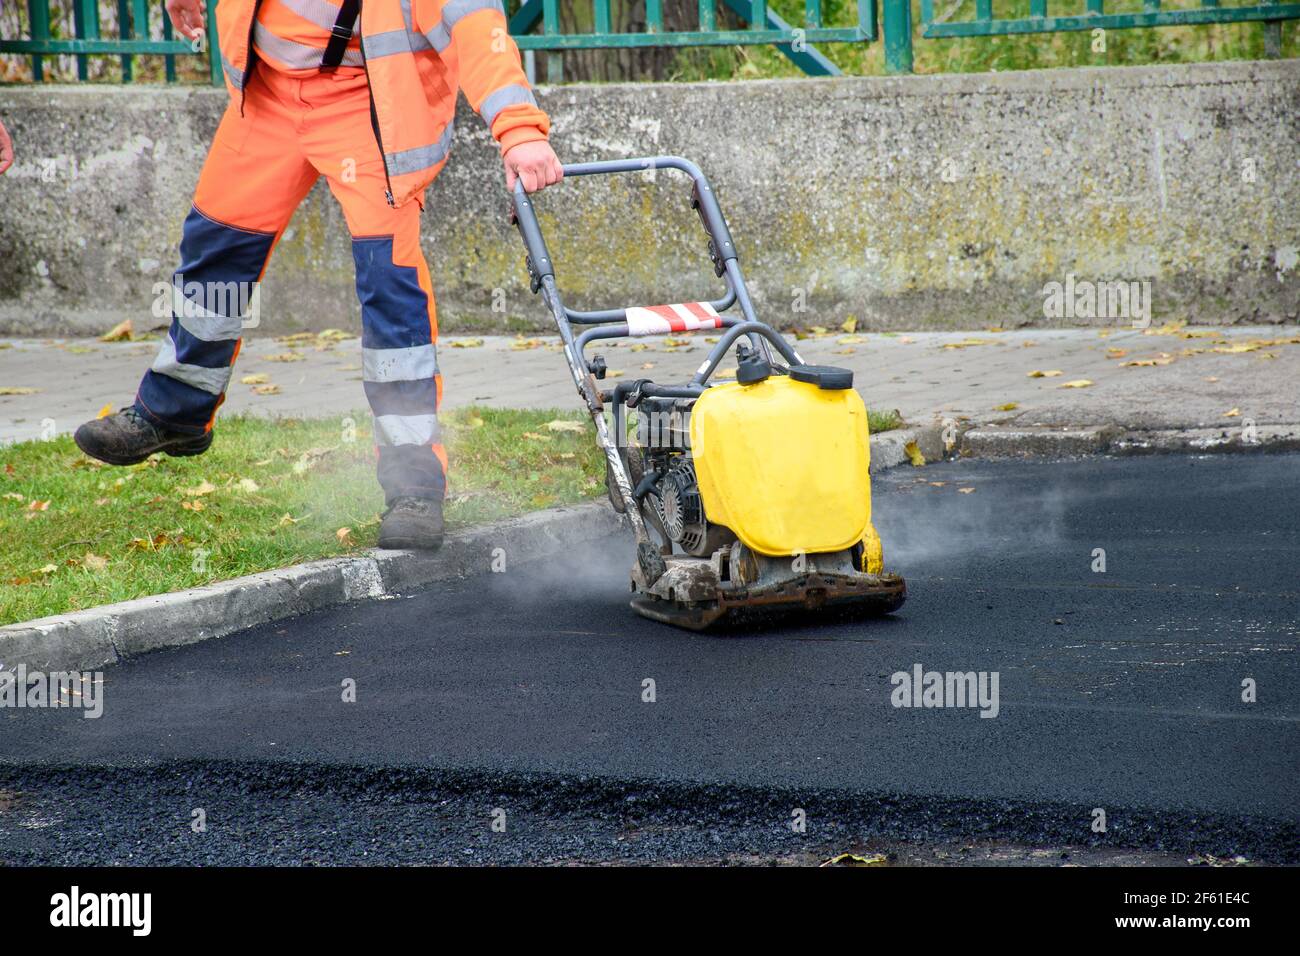 Paving worker uses vibratory plate compactor to compact new asphalt near curbstones Stock Photo